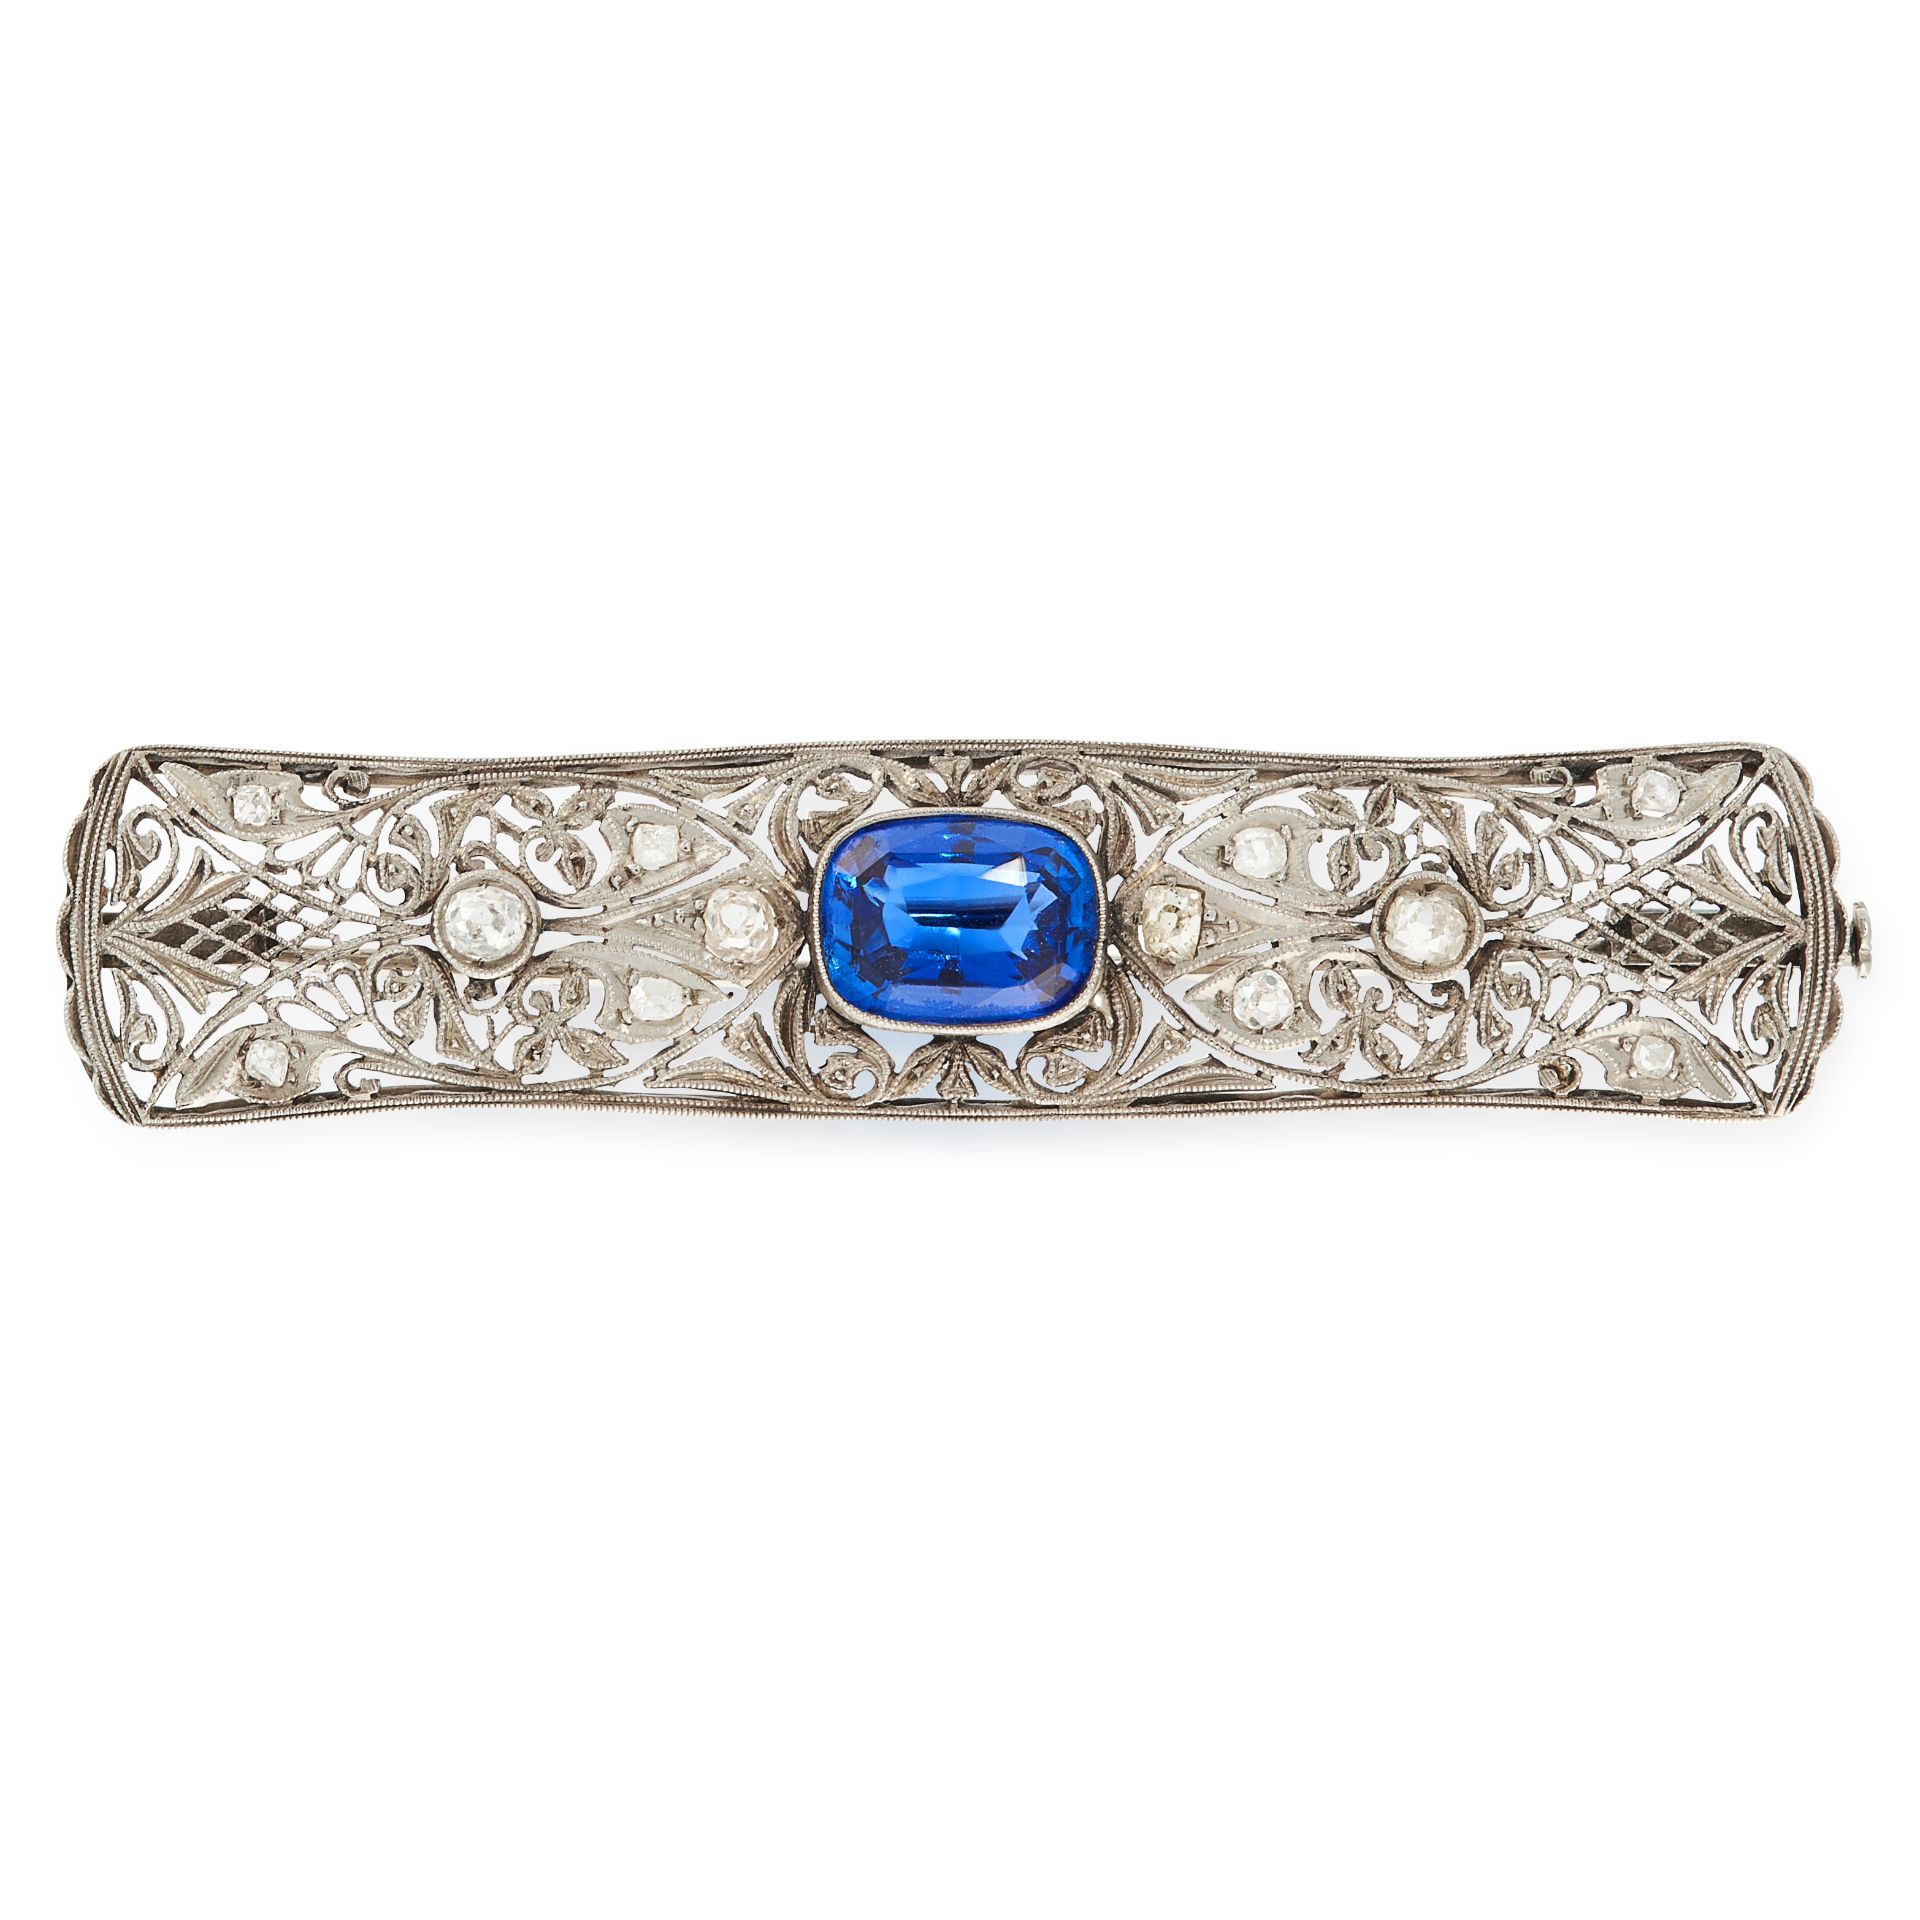 A SYNTHETIC SAPPHIRE AND DIAMOND BAR BROOCH in open framework design, set with a cushion cut